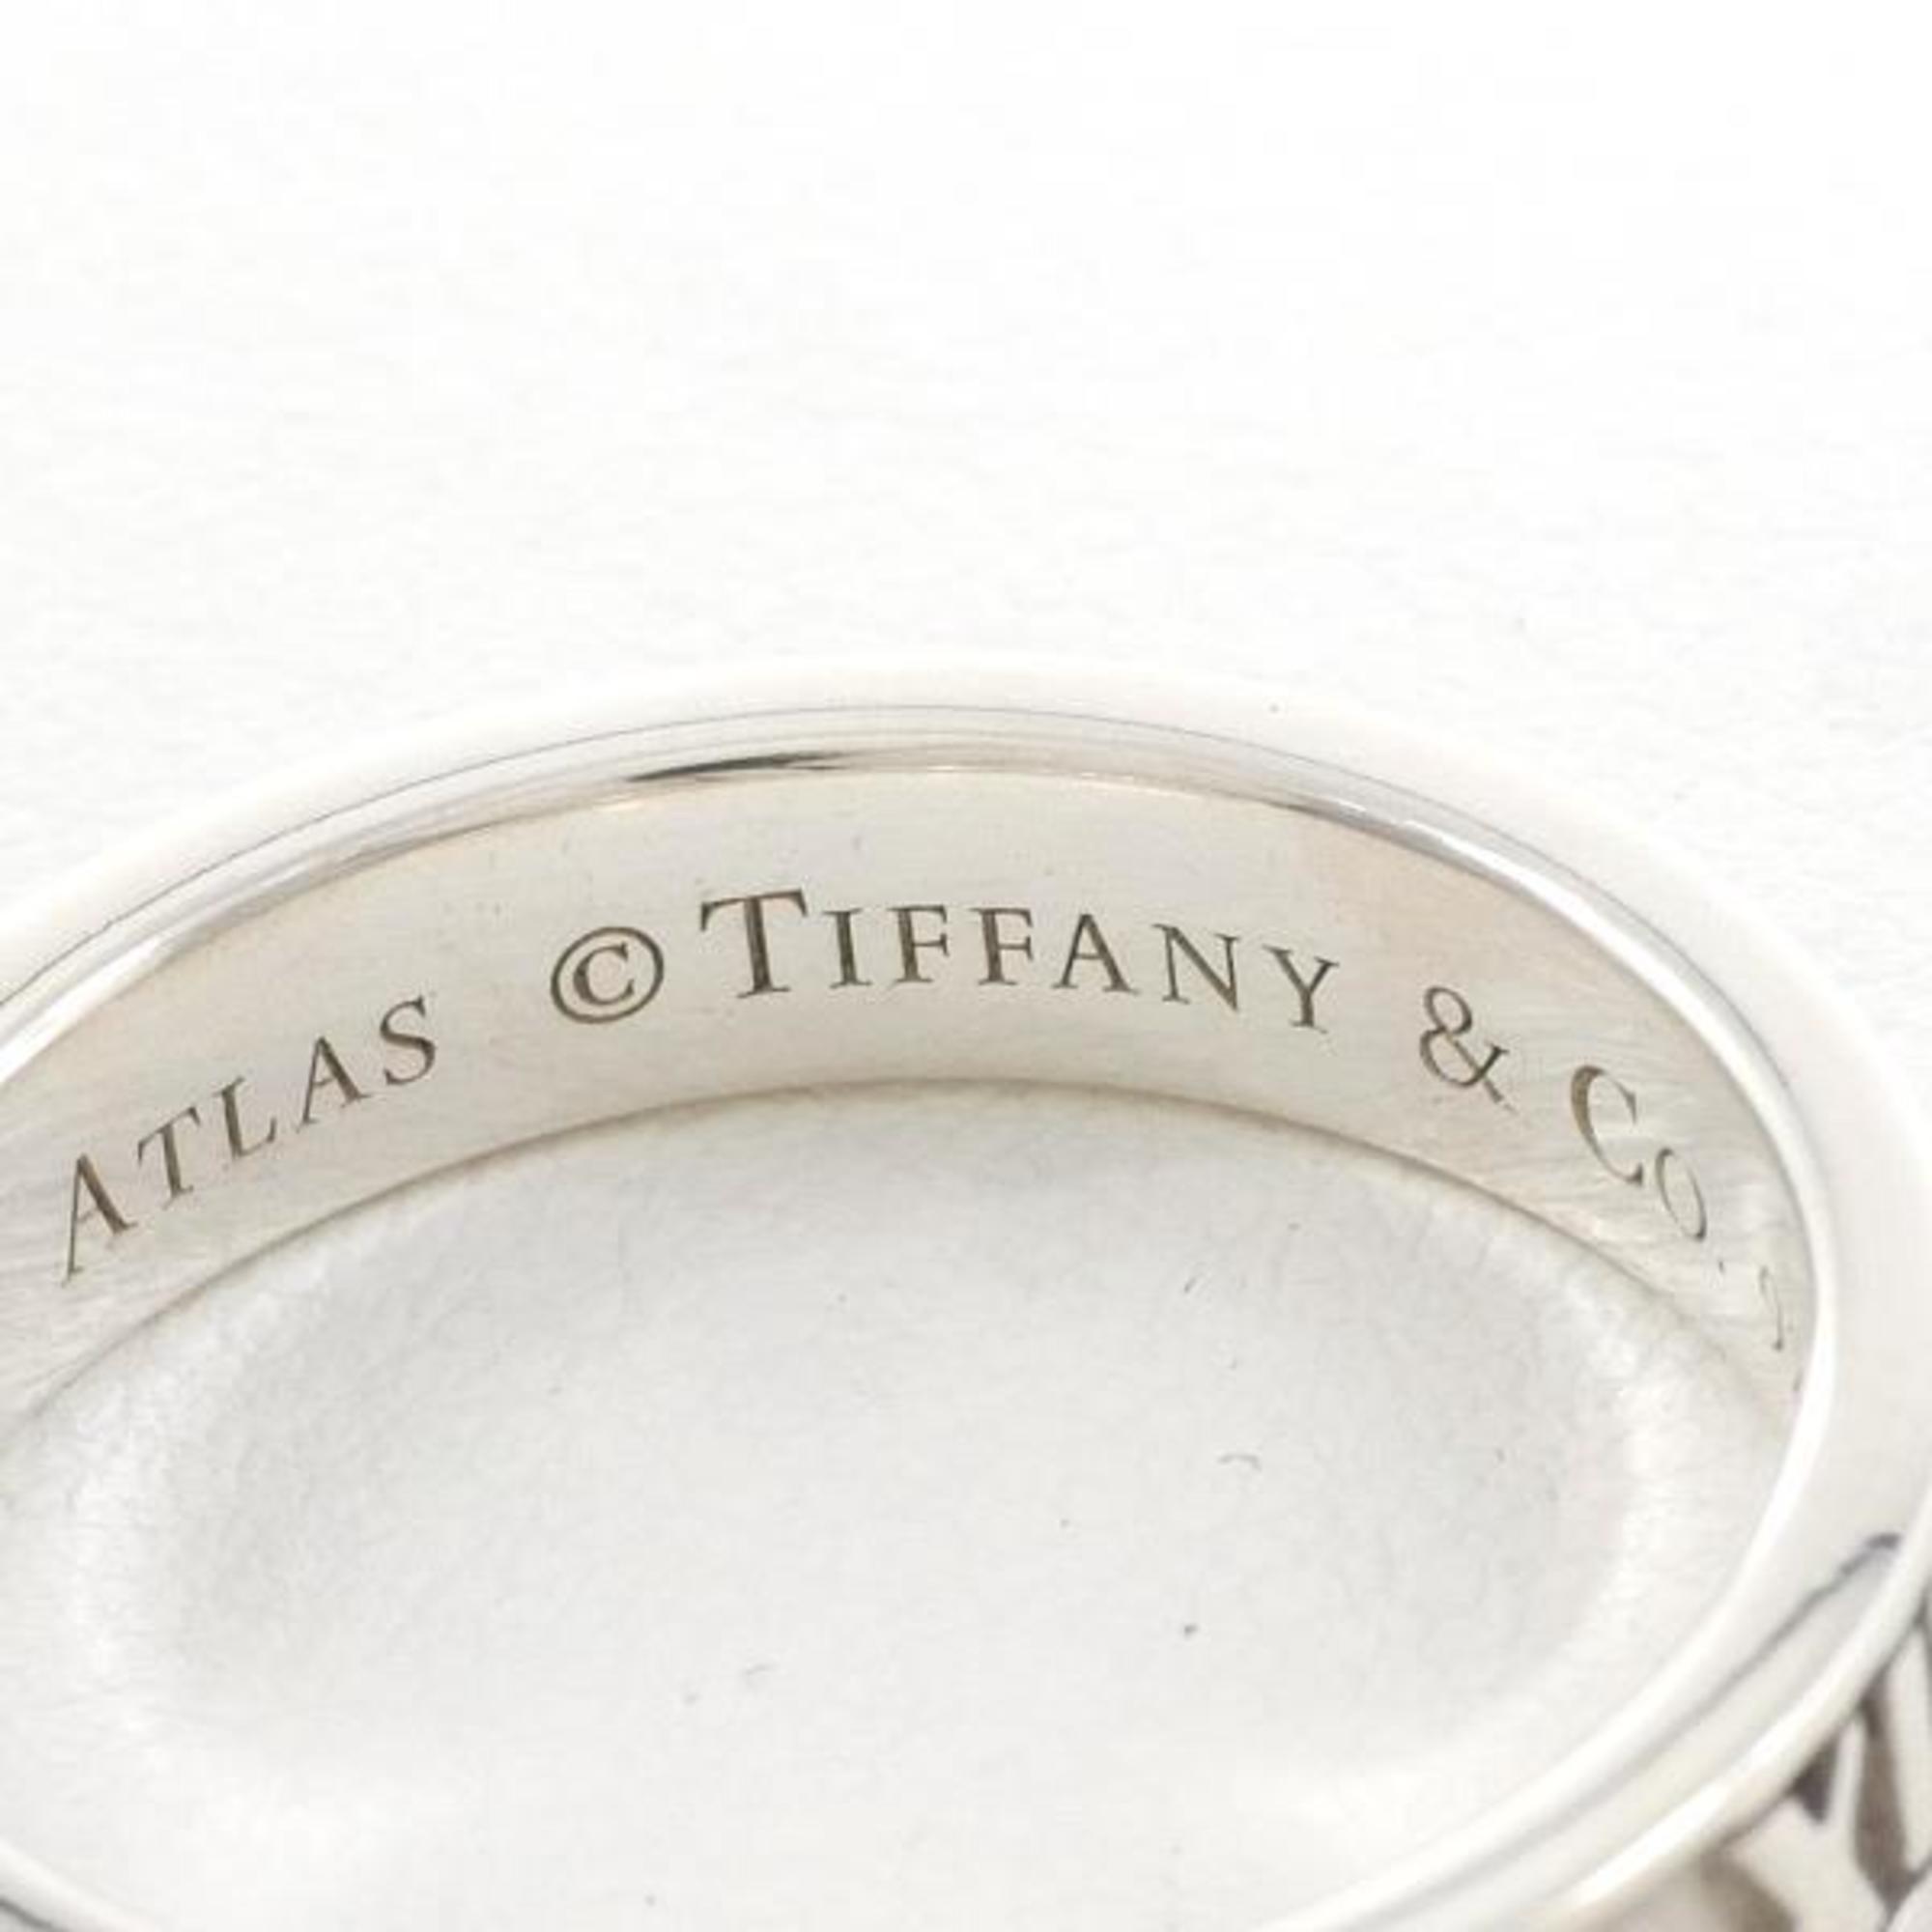 Tiffany Atlas Silver Ring Total weight approx. 2.9g